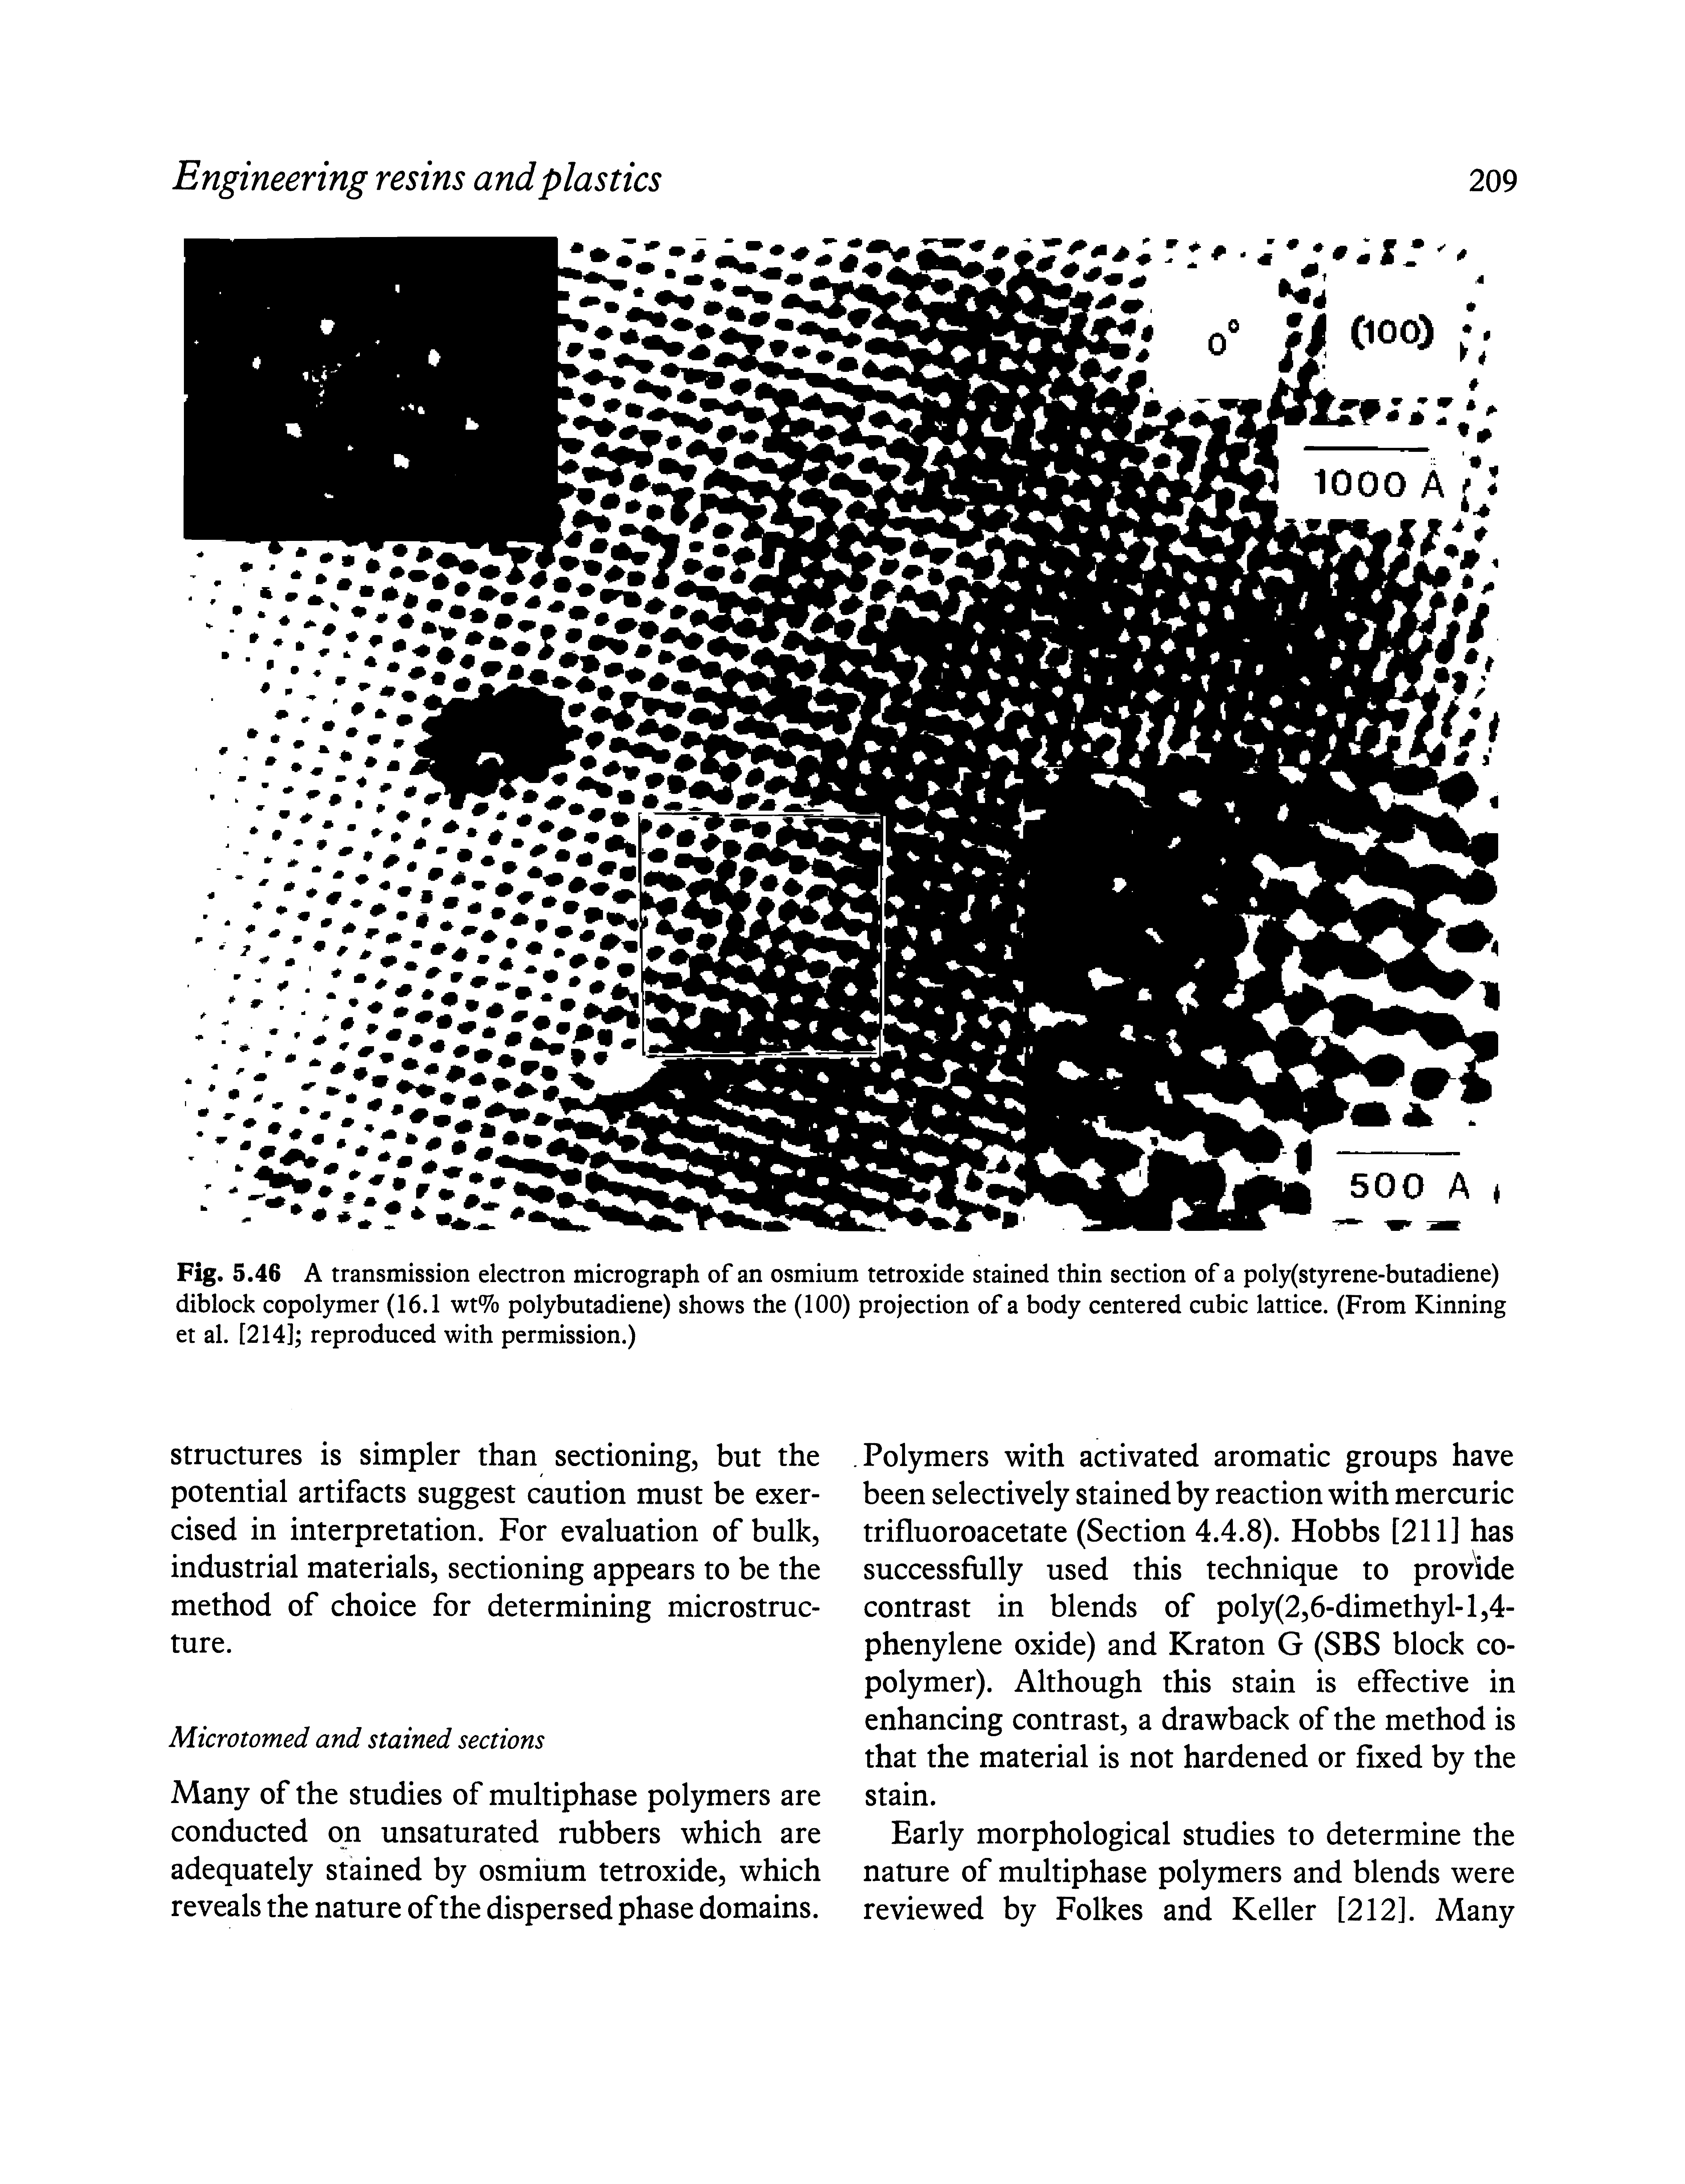 Fig. 5.46 A transmission electron micrograph of an osmium tetroxide stained thin section of a poly(styrene-butadiene) diblock copolymer (16.1 wt% polybutadiene) shows the (100) projection of a body centered cubic lattice. (From Kinning et al. [214] reproduced with permission.)...